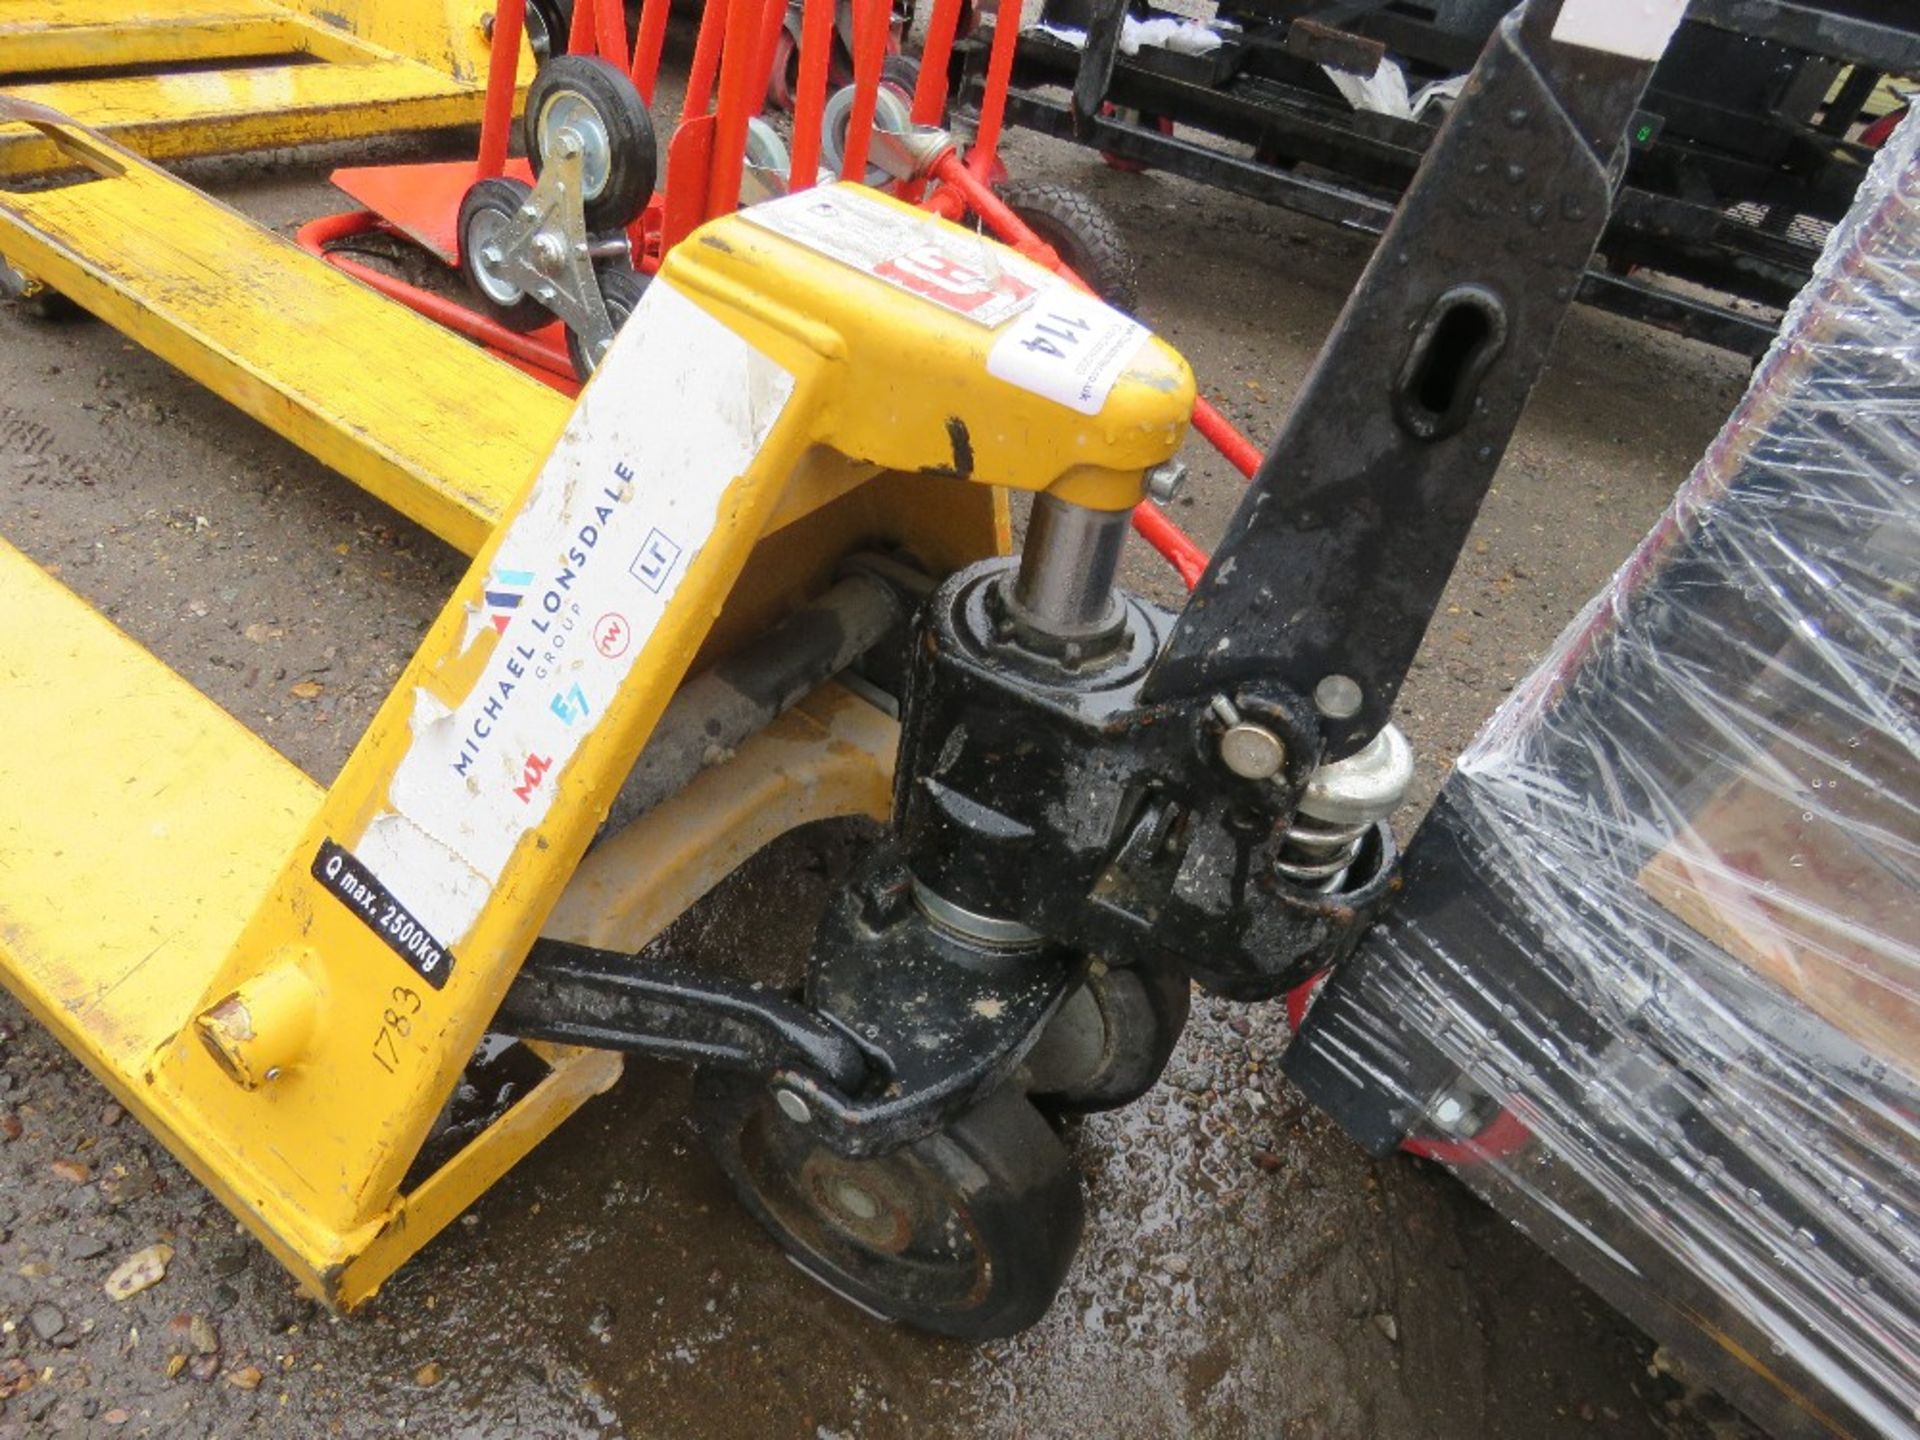 HYDRAULIC PALLET TRUCK. SOURCED FROM LARGE CONSTRUCTION COMPANY LIQUIDATION. - Image 3 of 3